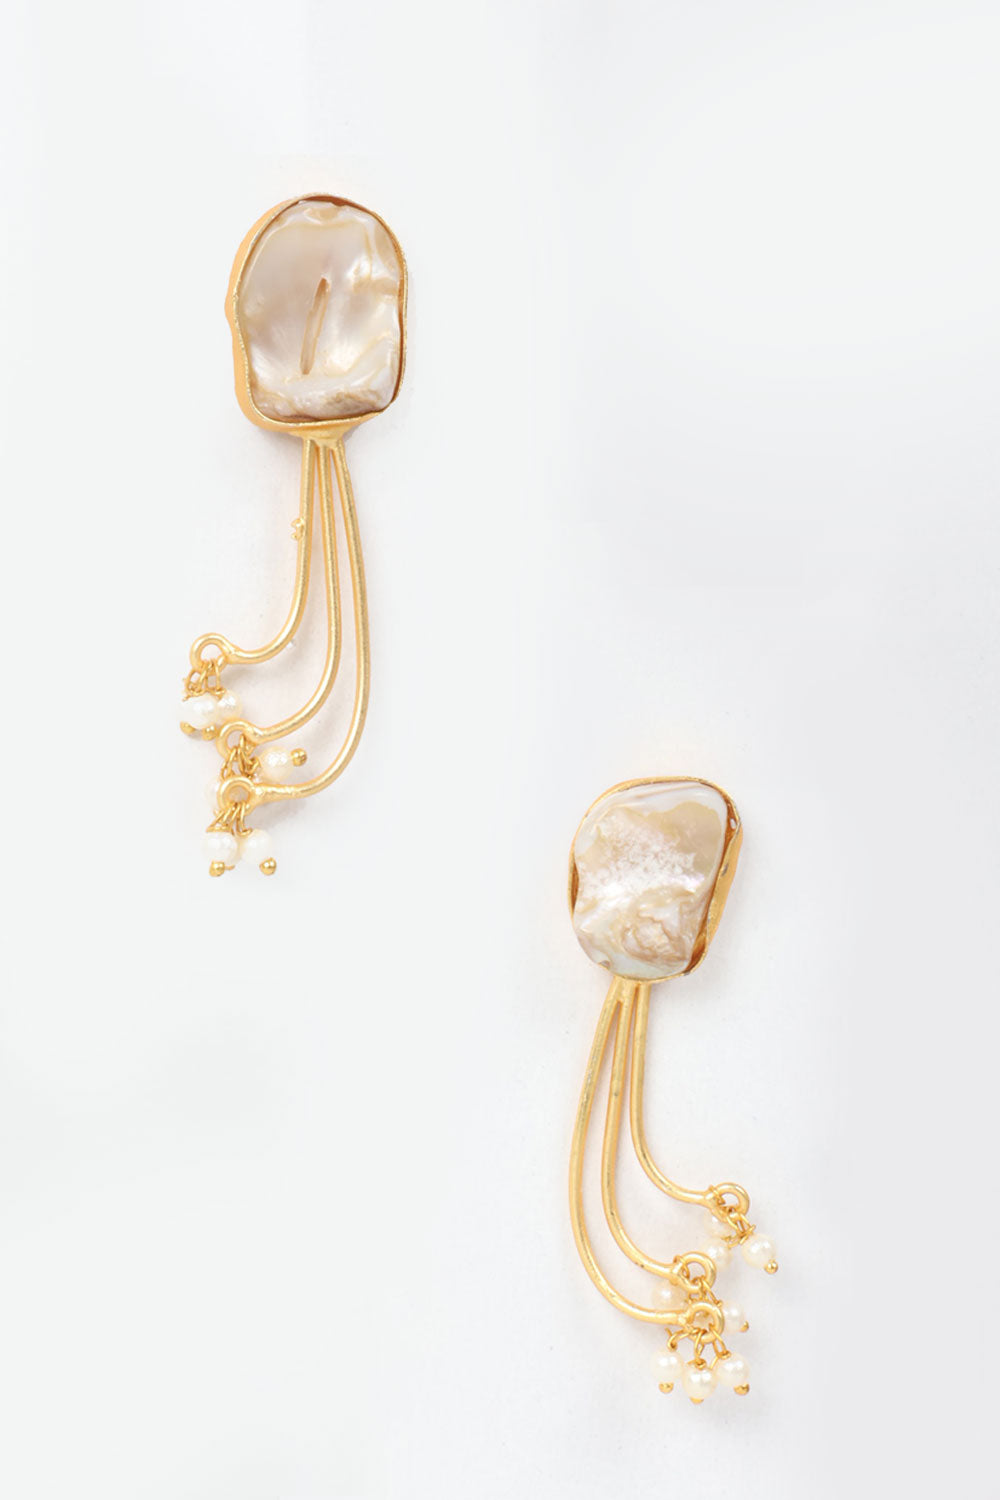 Handcrafted Brass Metal Drop Earrings with White Semi Precious Stone